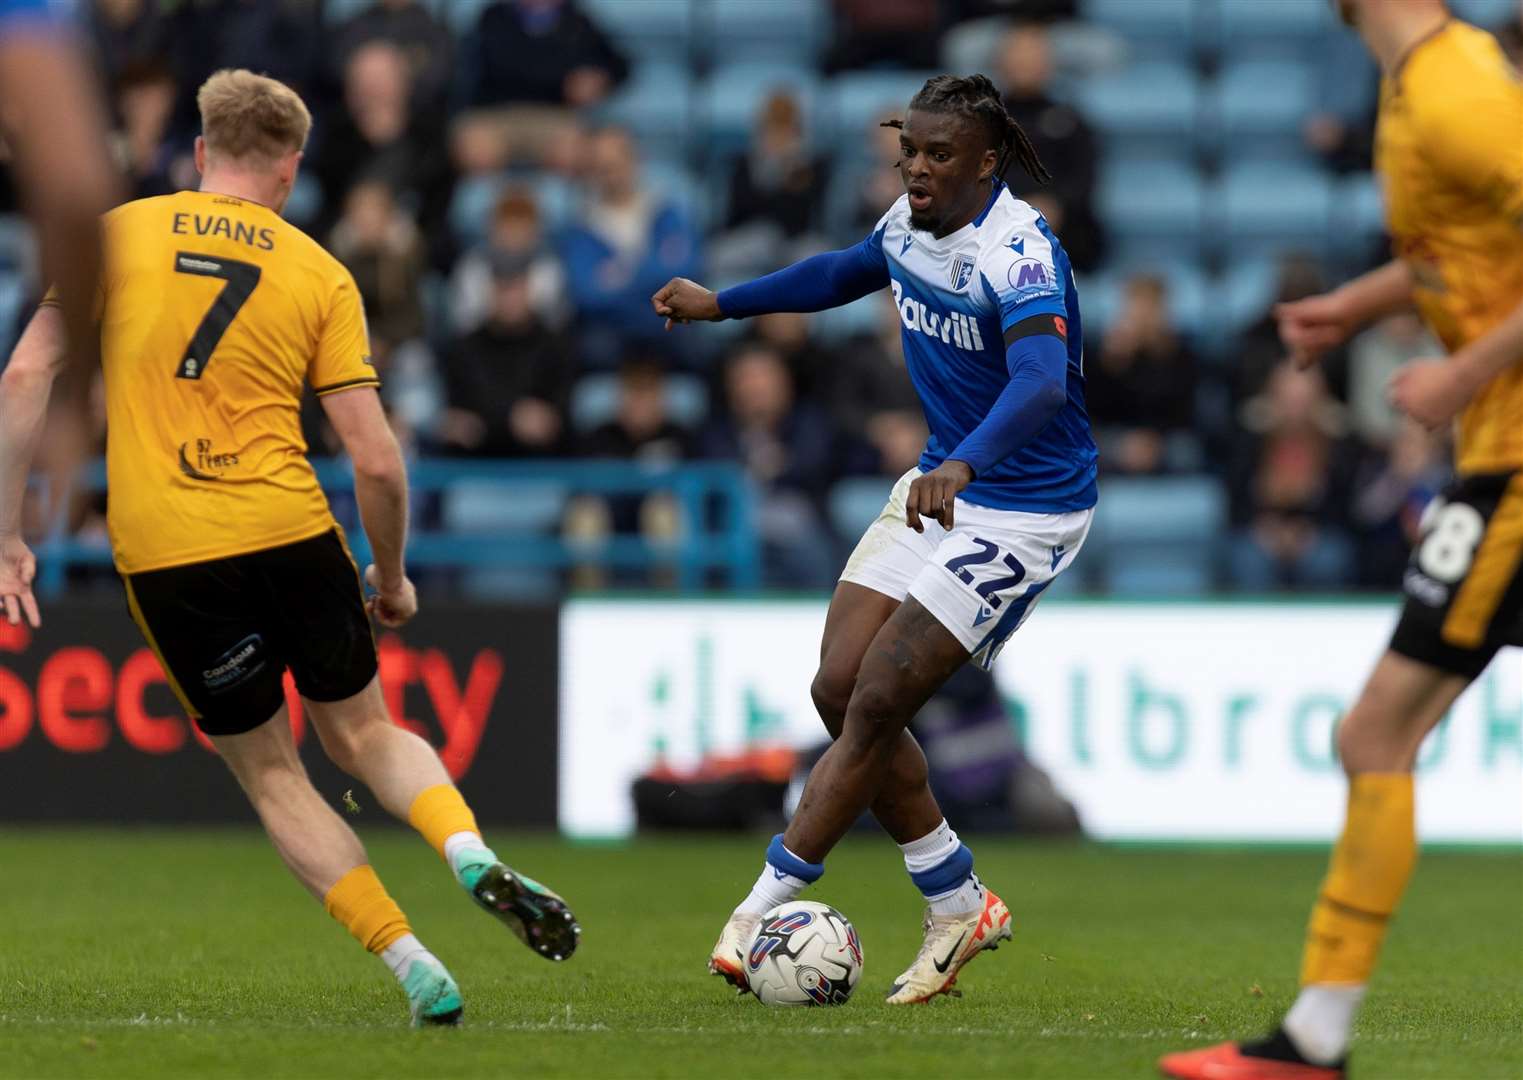 Shad Ogie in action for Gillingham against Newport County Picture: @Julian_KPI